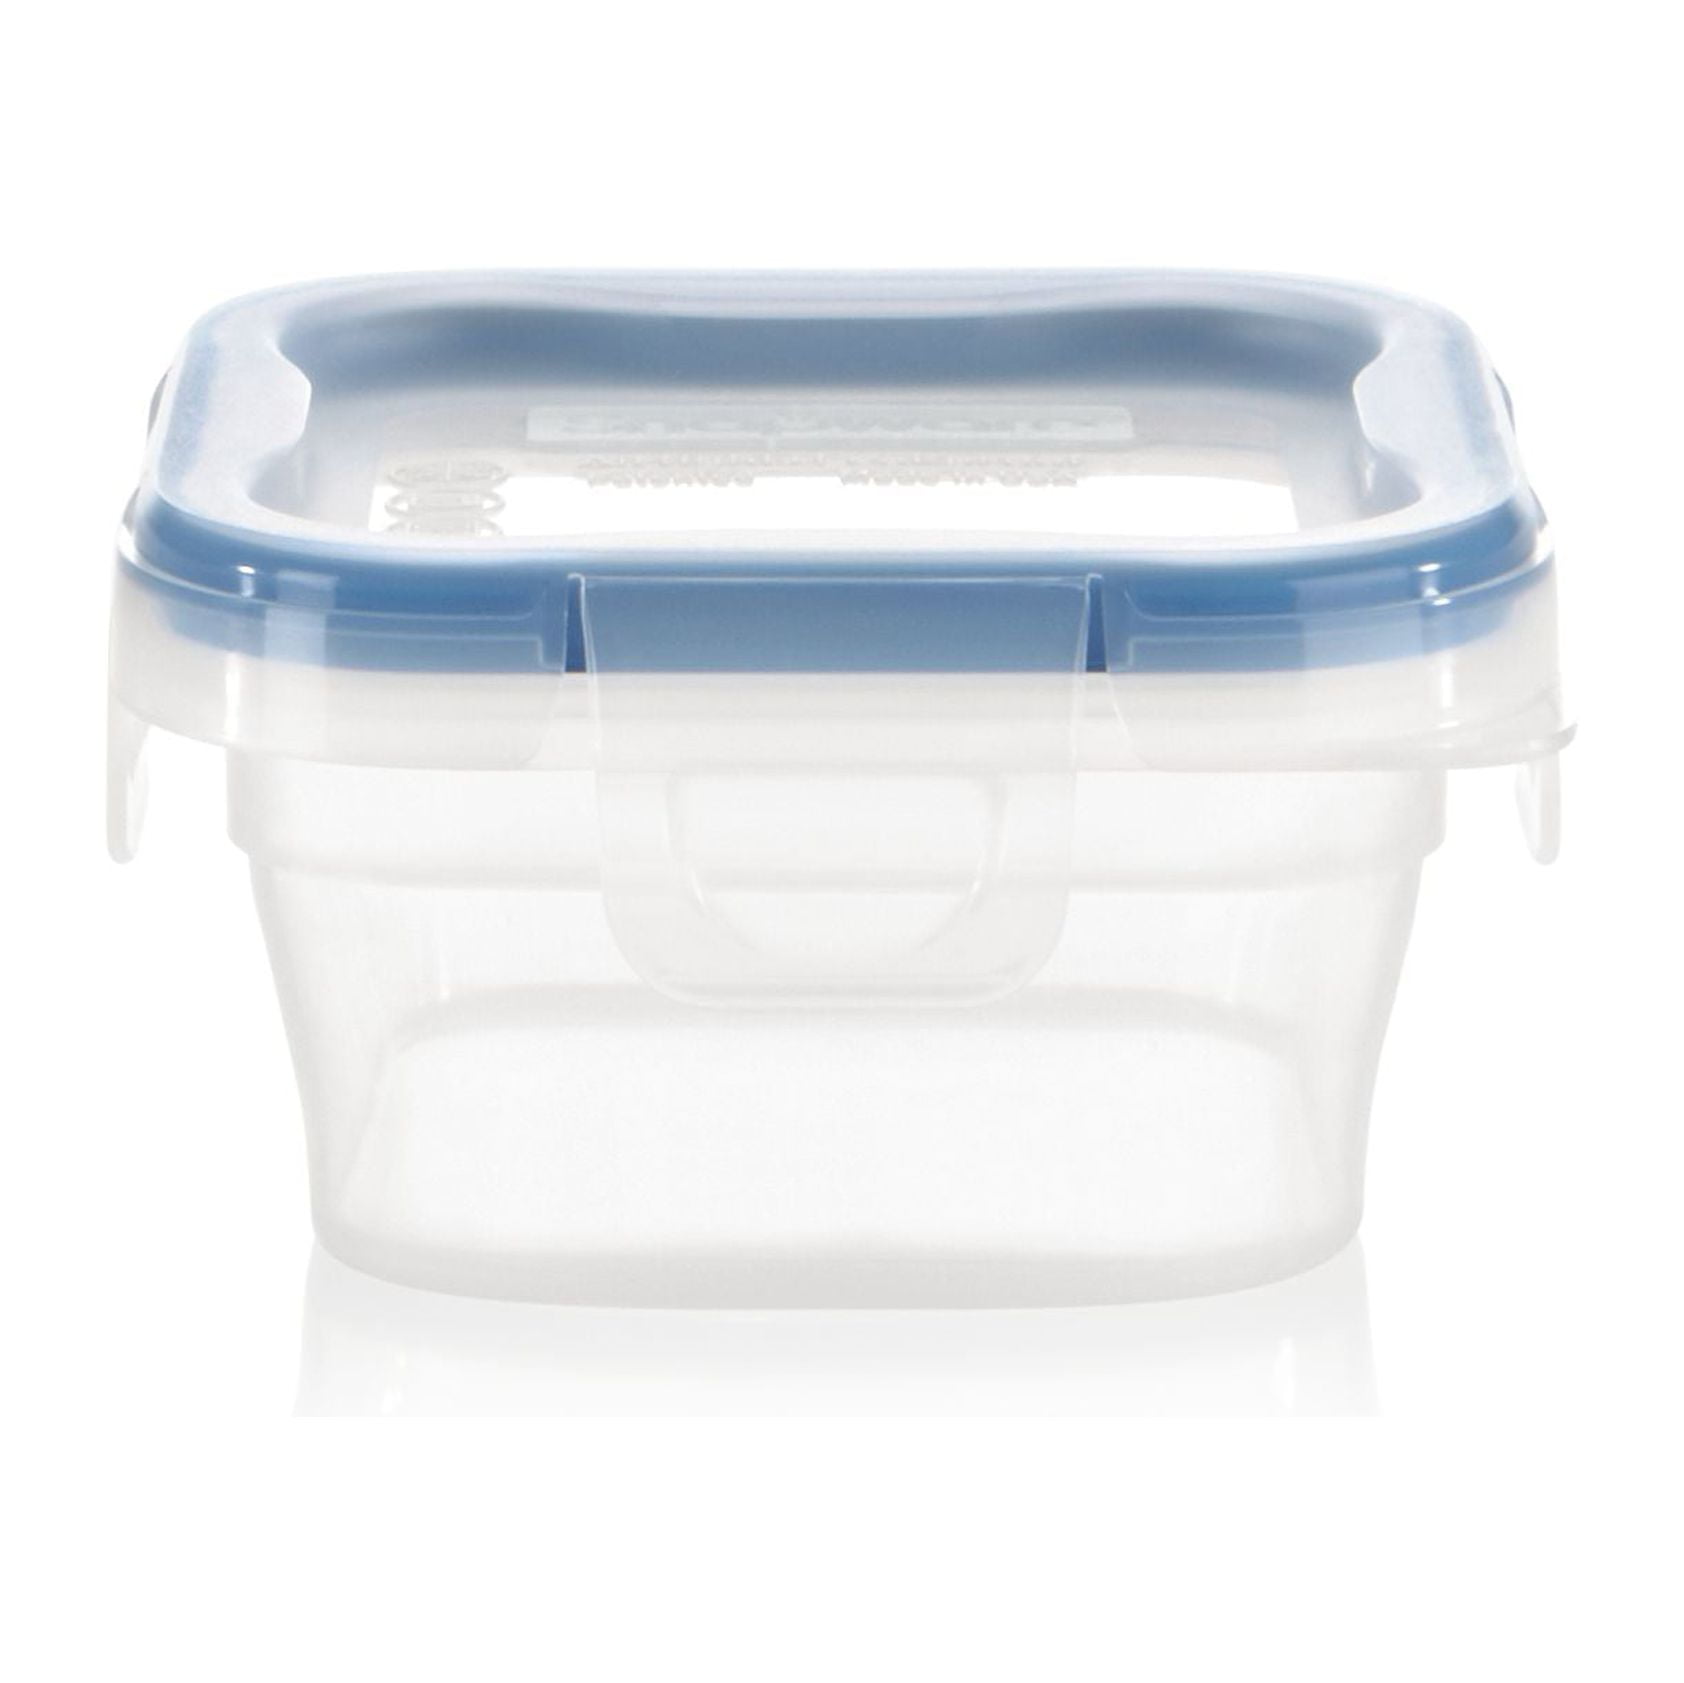 TUPPERWARE 1 SMALL 2-cup KEEP TABS STORAGE KEEPER CONTAINER